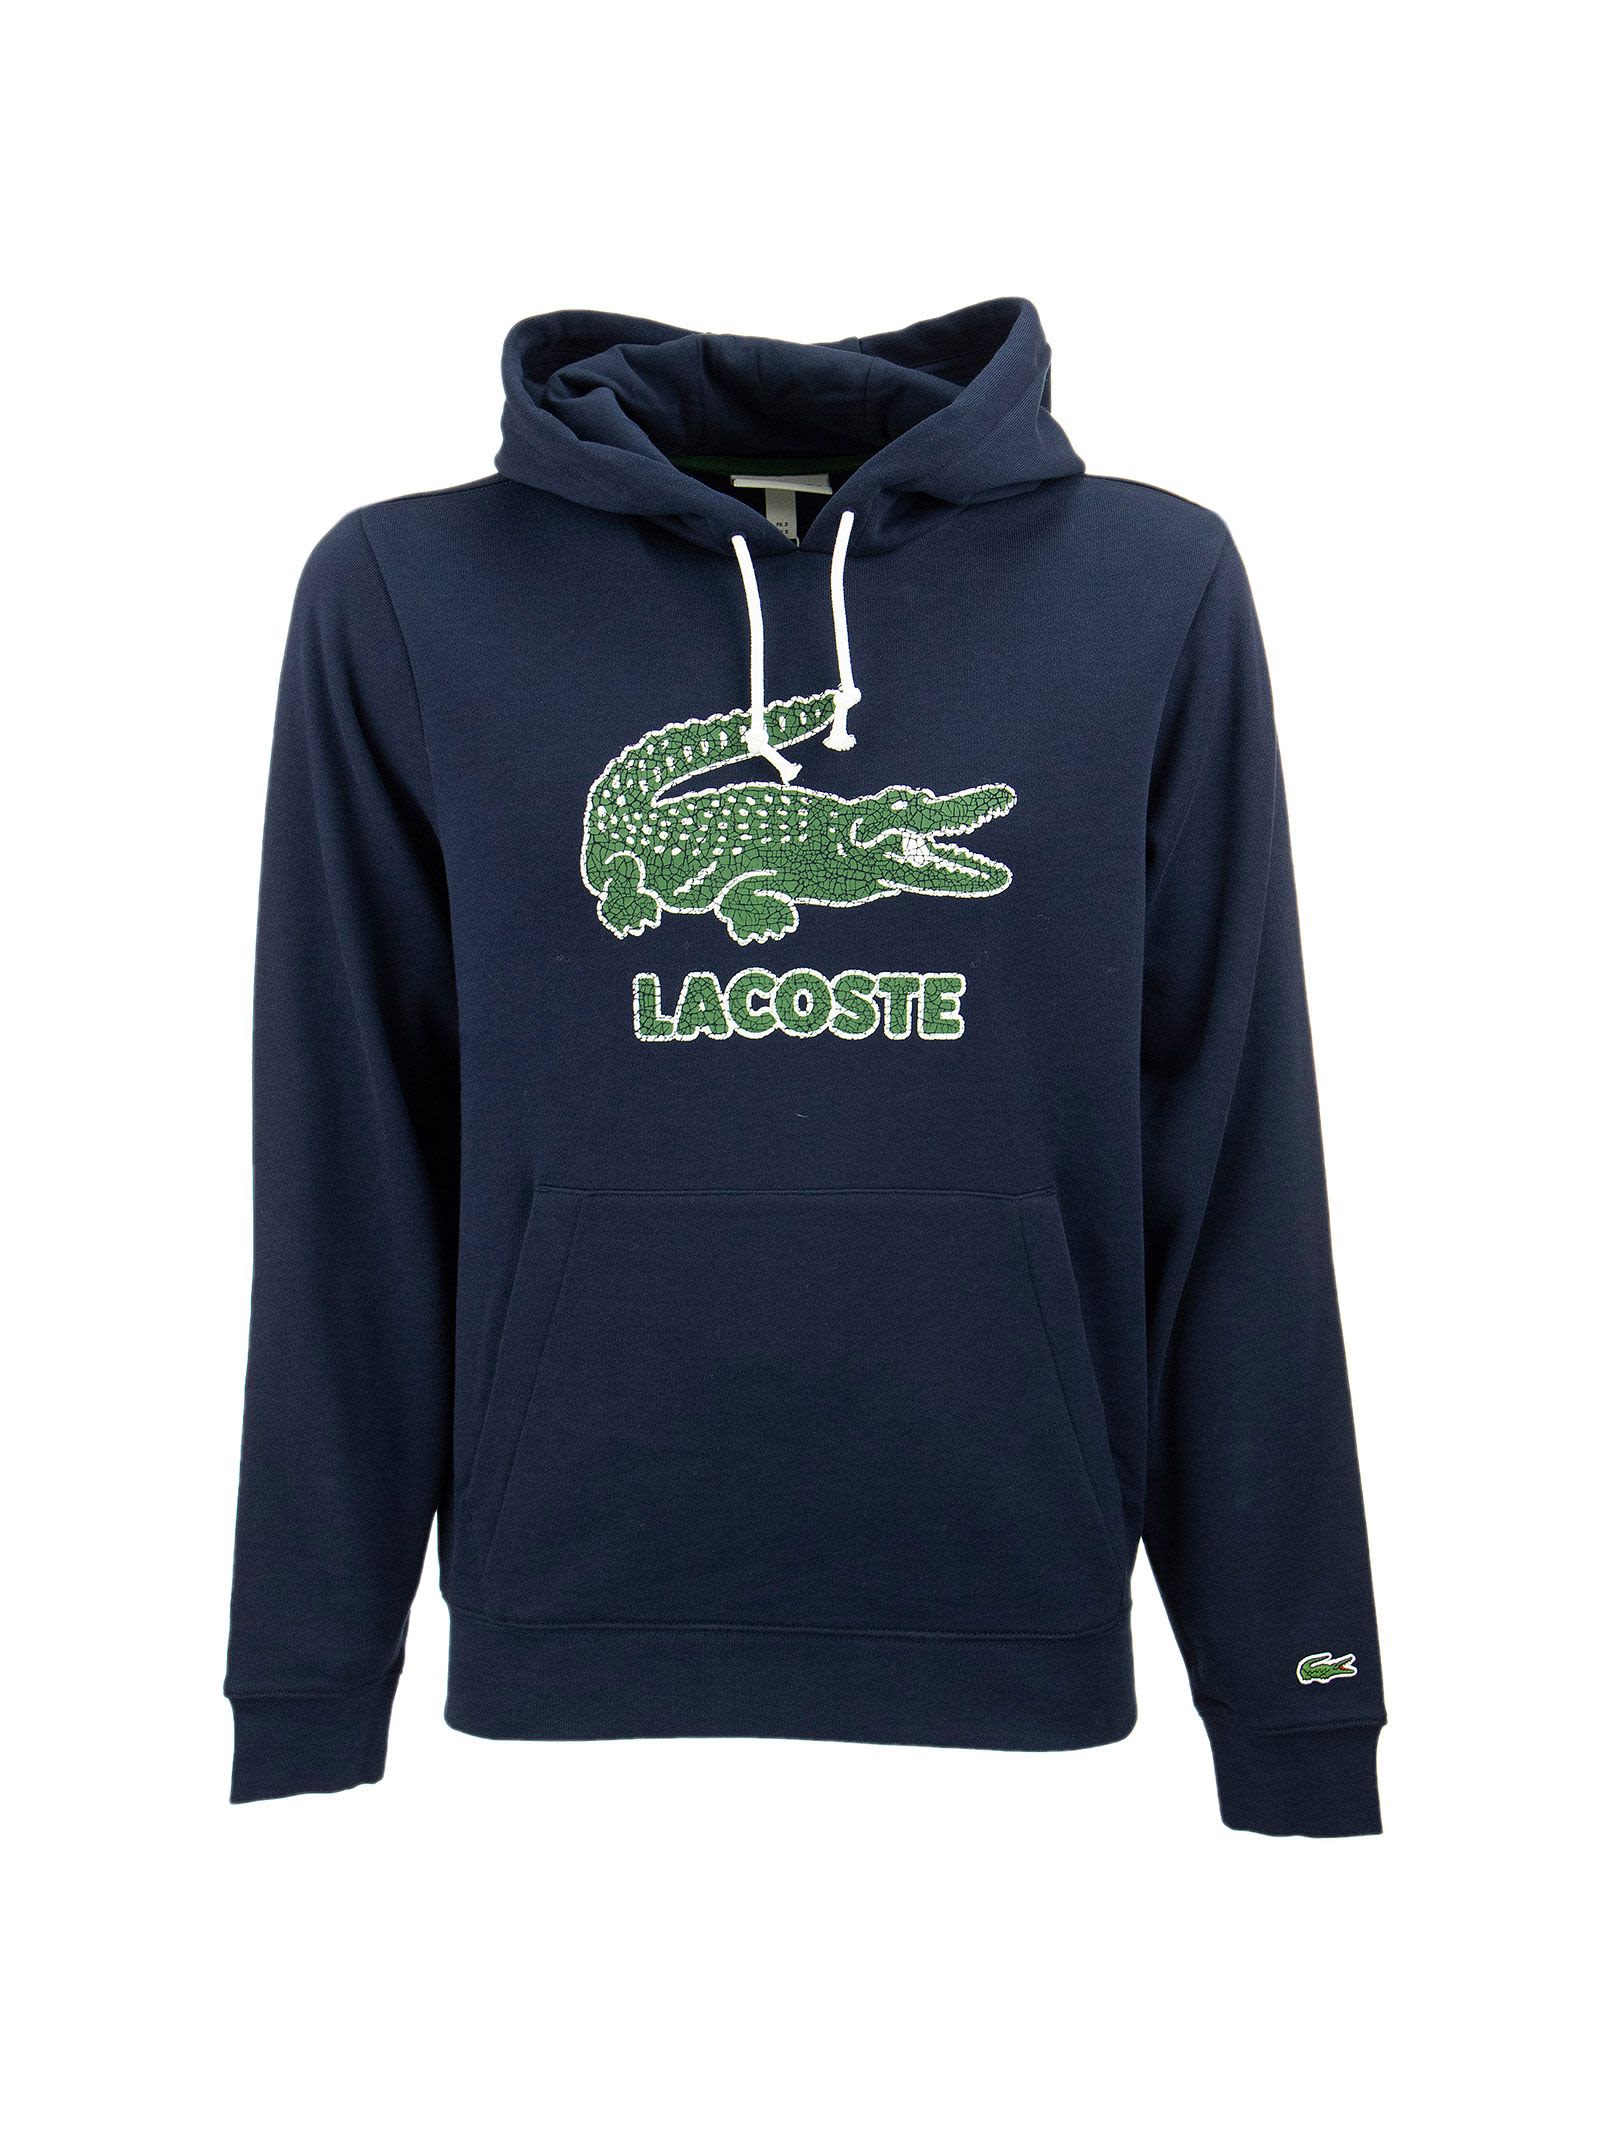 Lacoste Hooded Sweatshirt With Cracked Printed Logo